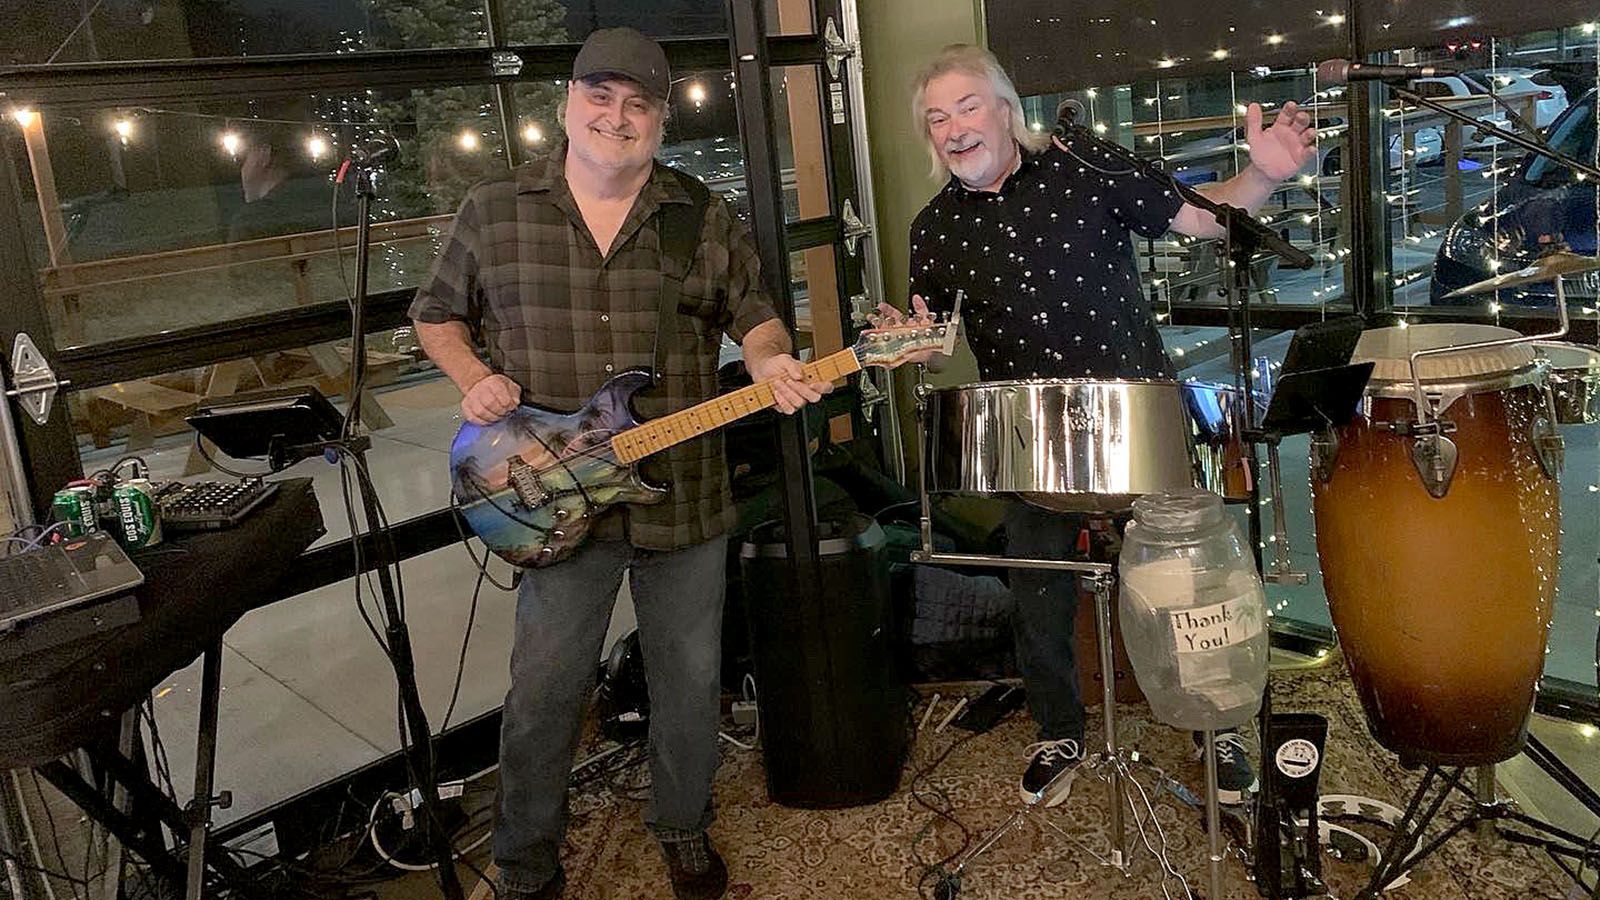 Rod Bowers, left, and Doug Laughlin are all about fun with their band Island Vibe.